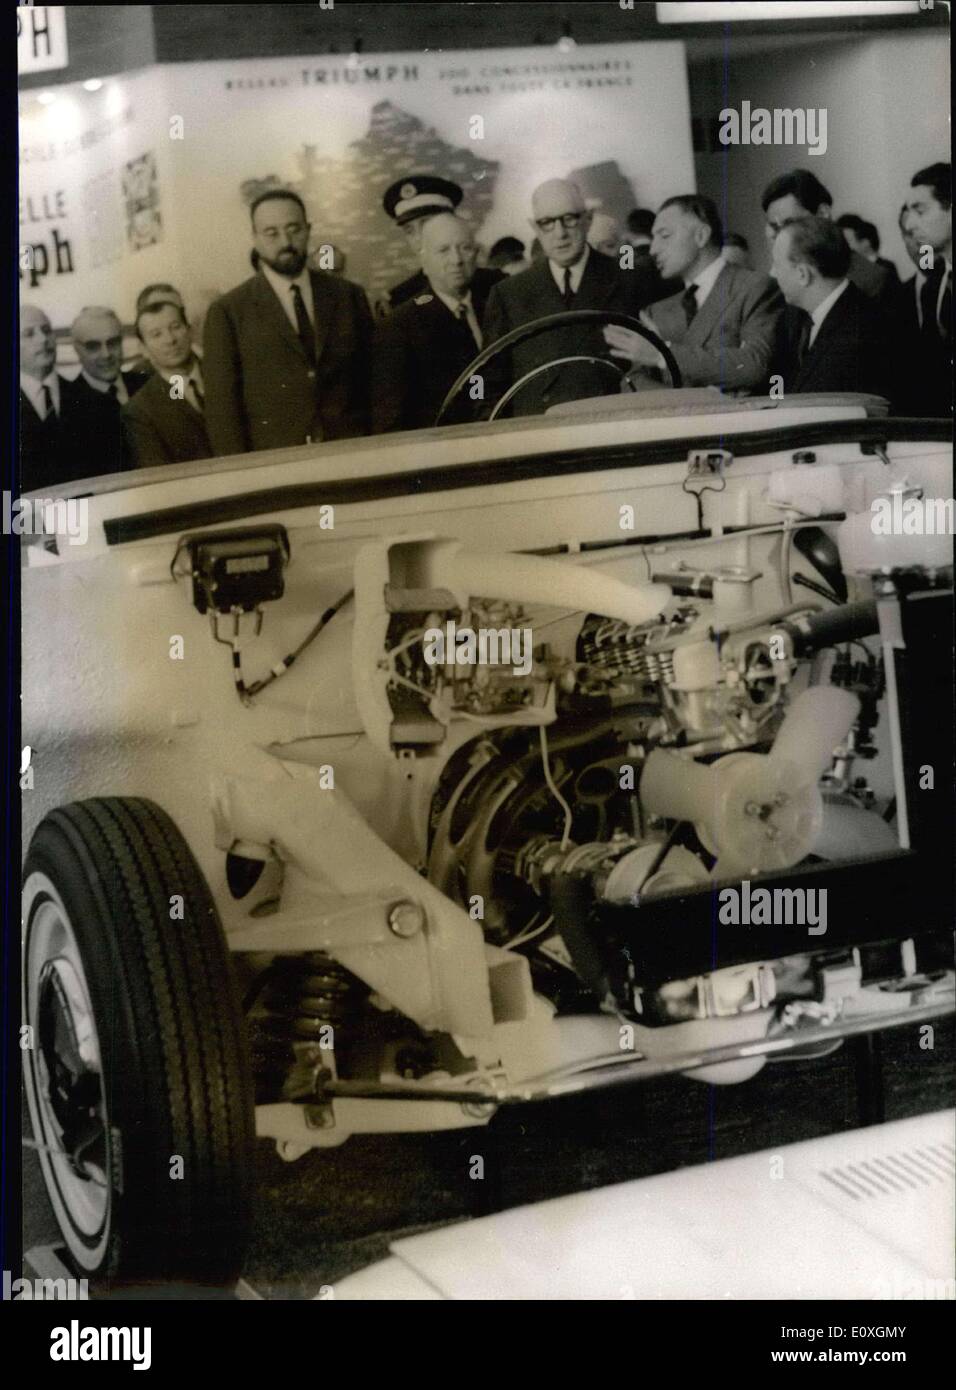 Oct. 07, 1966 - General De Gaulle opens motor show.: General De Gaulle presided at the official opening of the Annual Motor Show in Paris today.Photo shows General De Gaulle pictured during the opening of the motor show, on left M. Edgar Pisani, Minister of equipment. Stock Photo